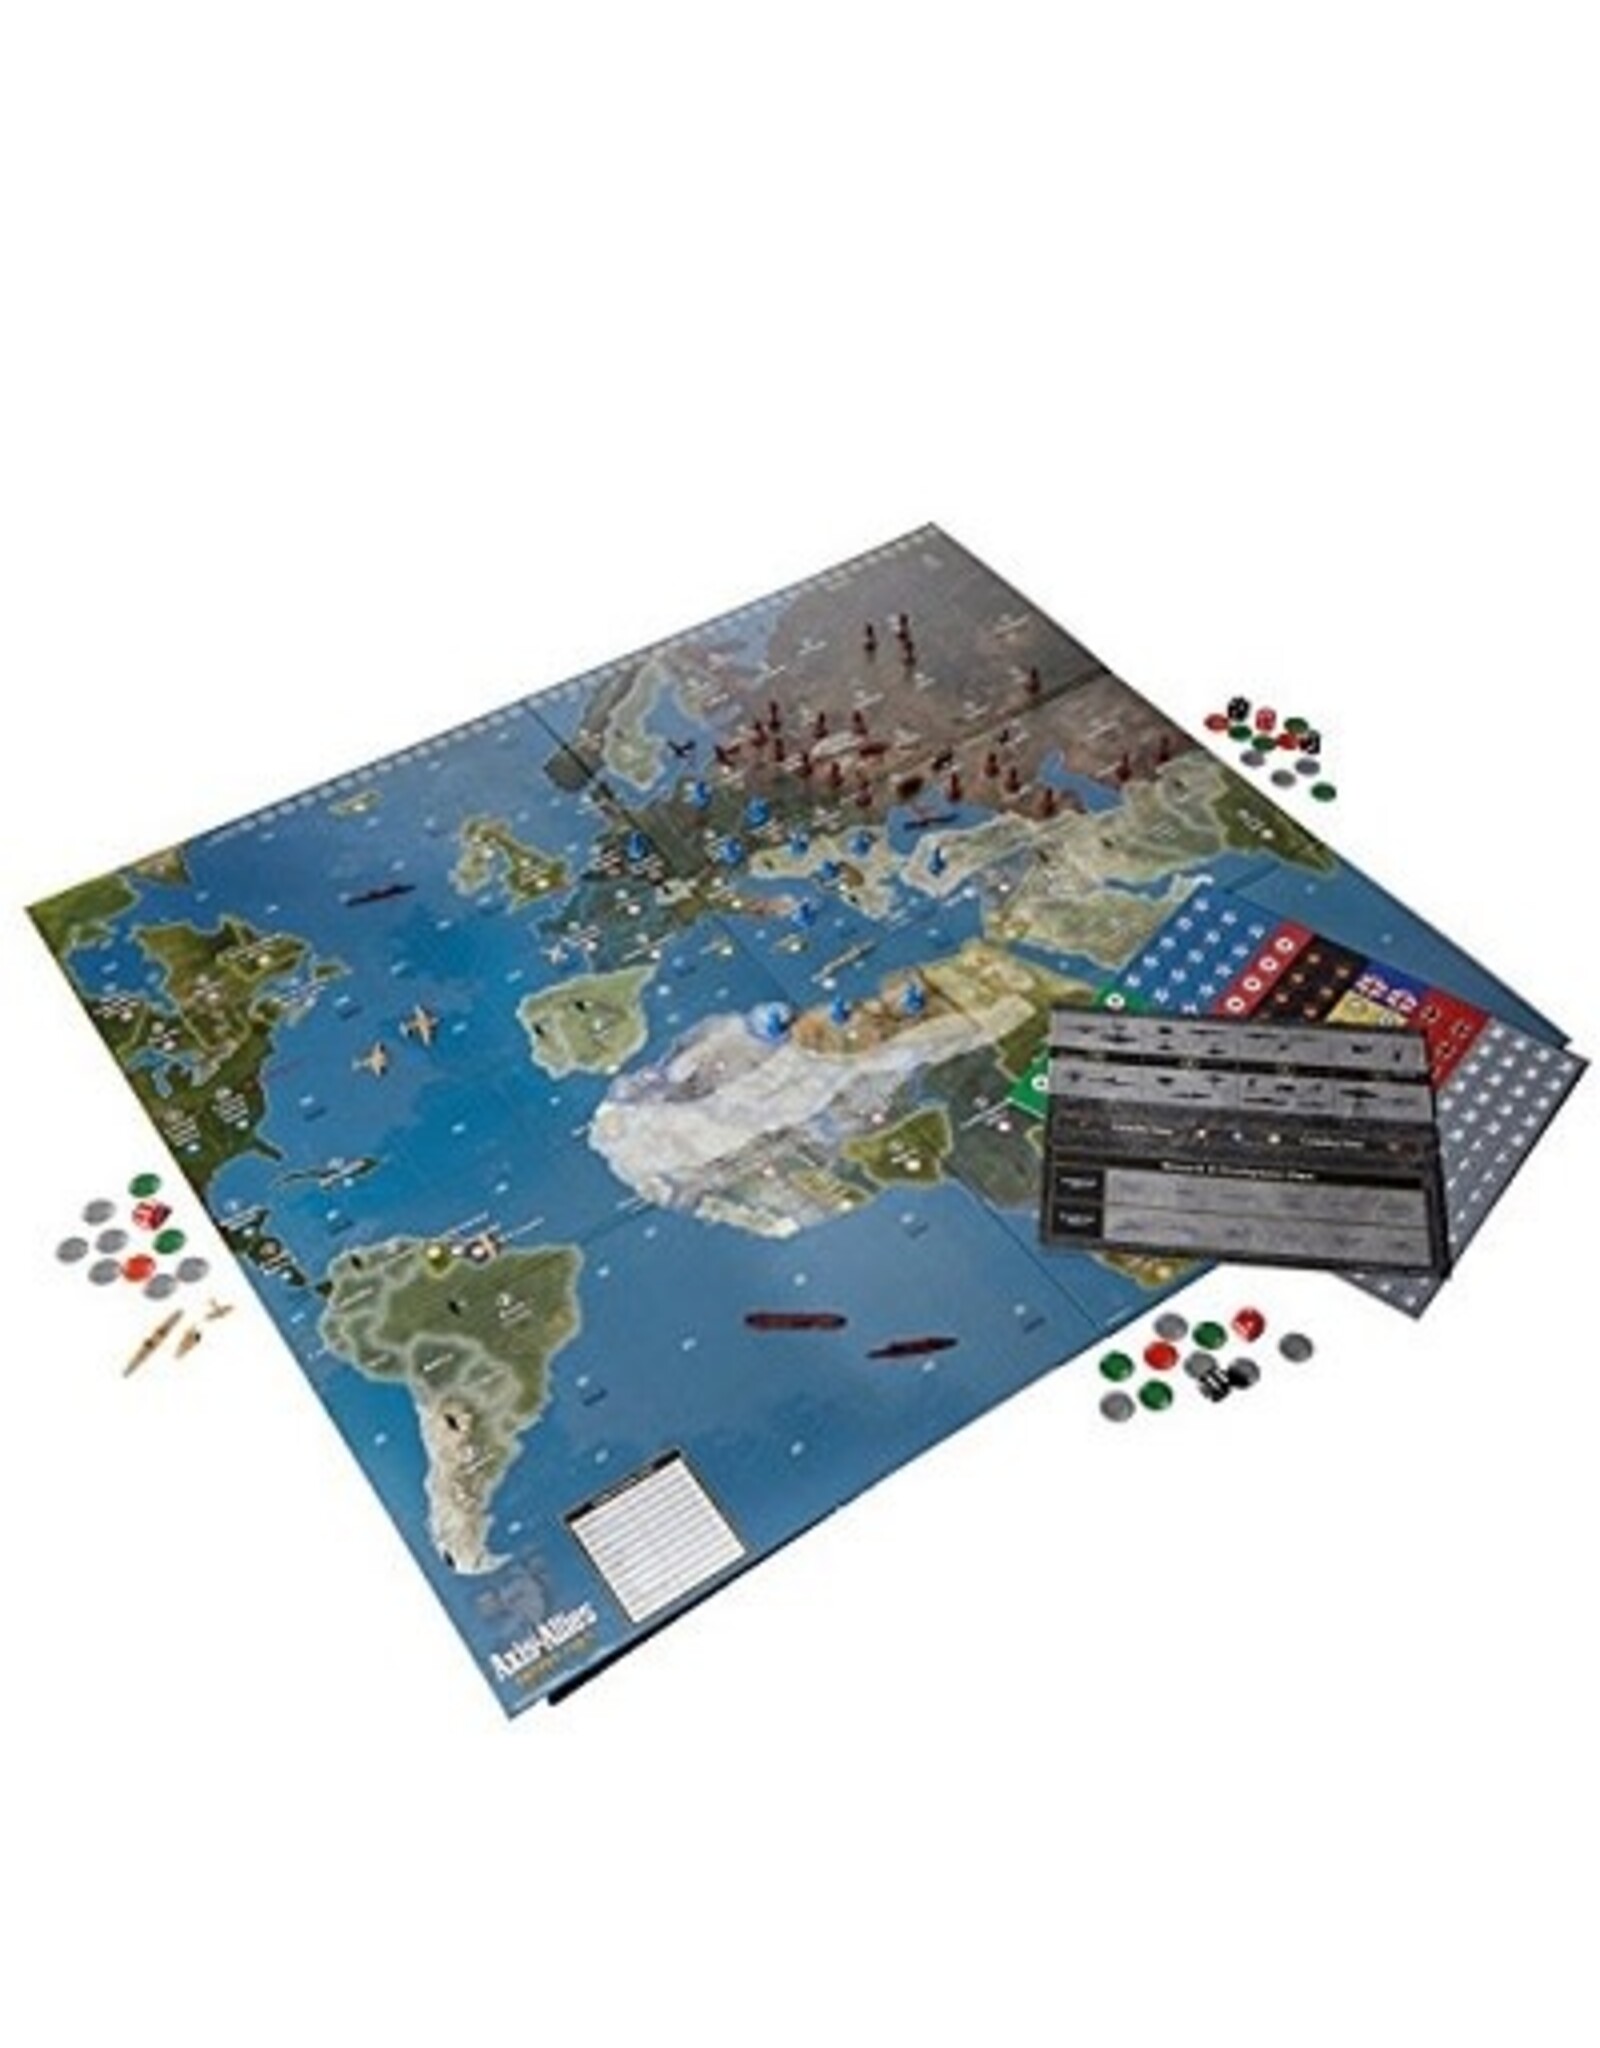 Axis & Allies 1942 - Second Edition